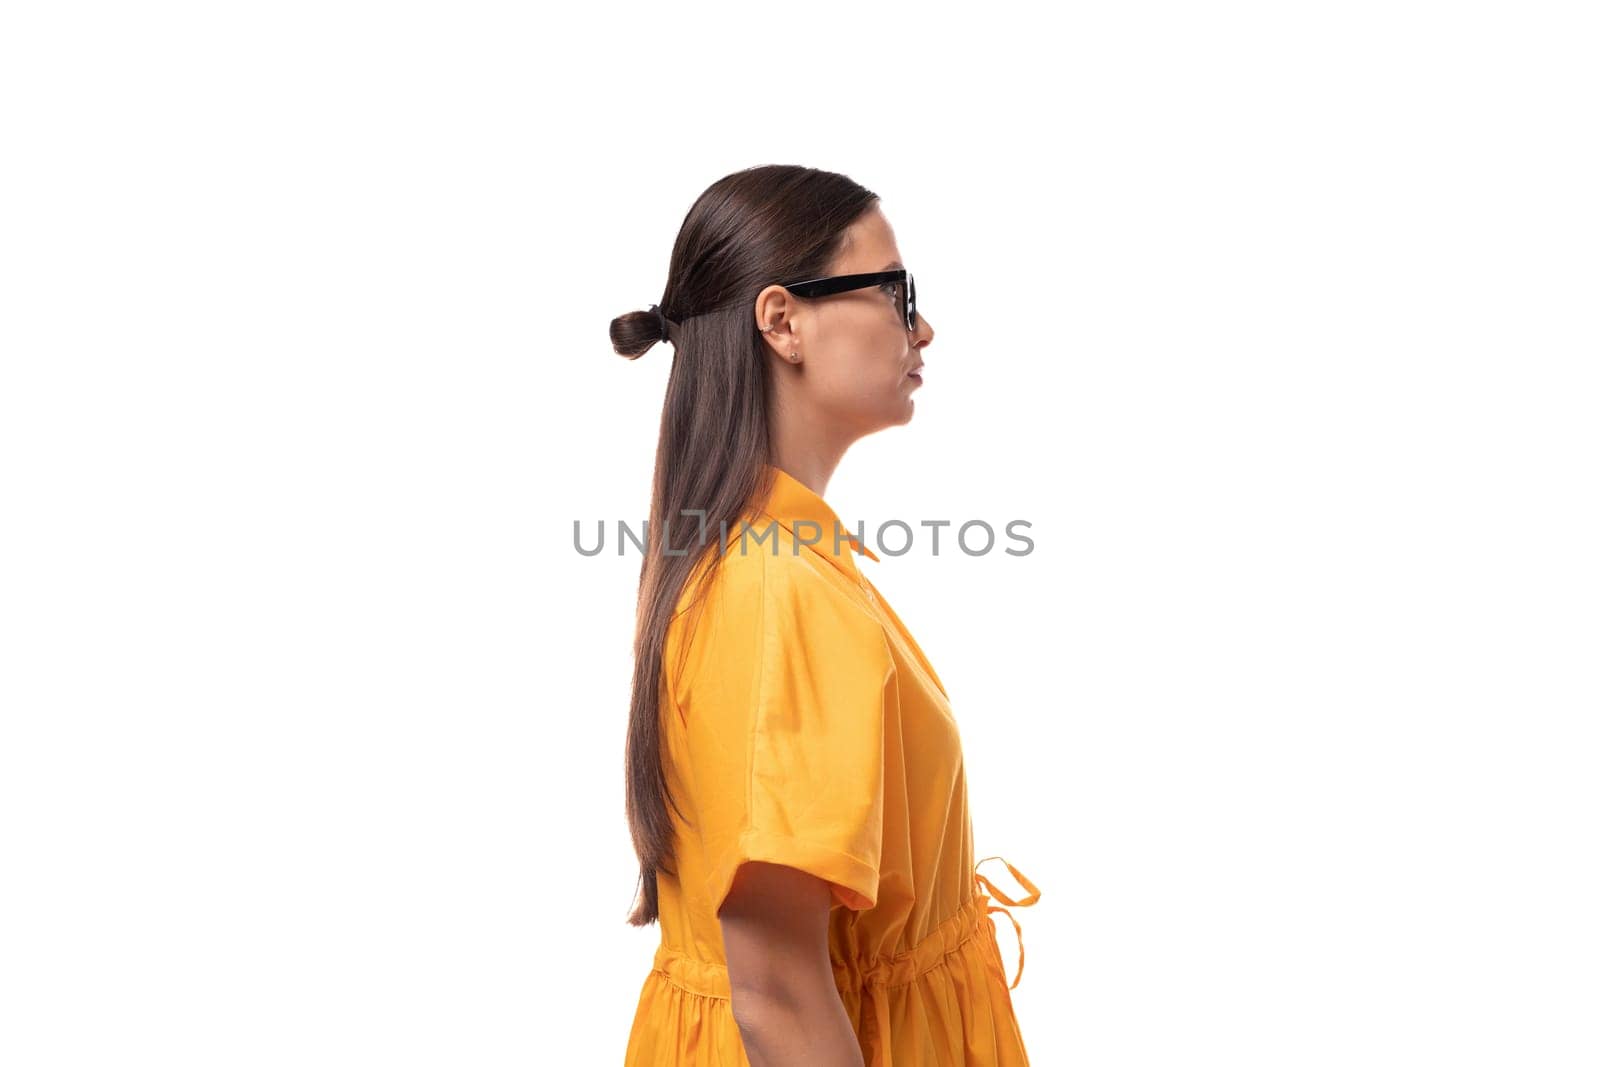 European young woman with black hair dressed in an orange summer dress stands sideways.